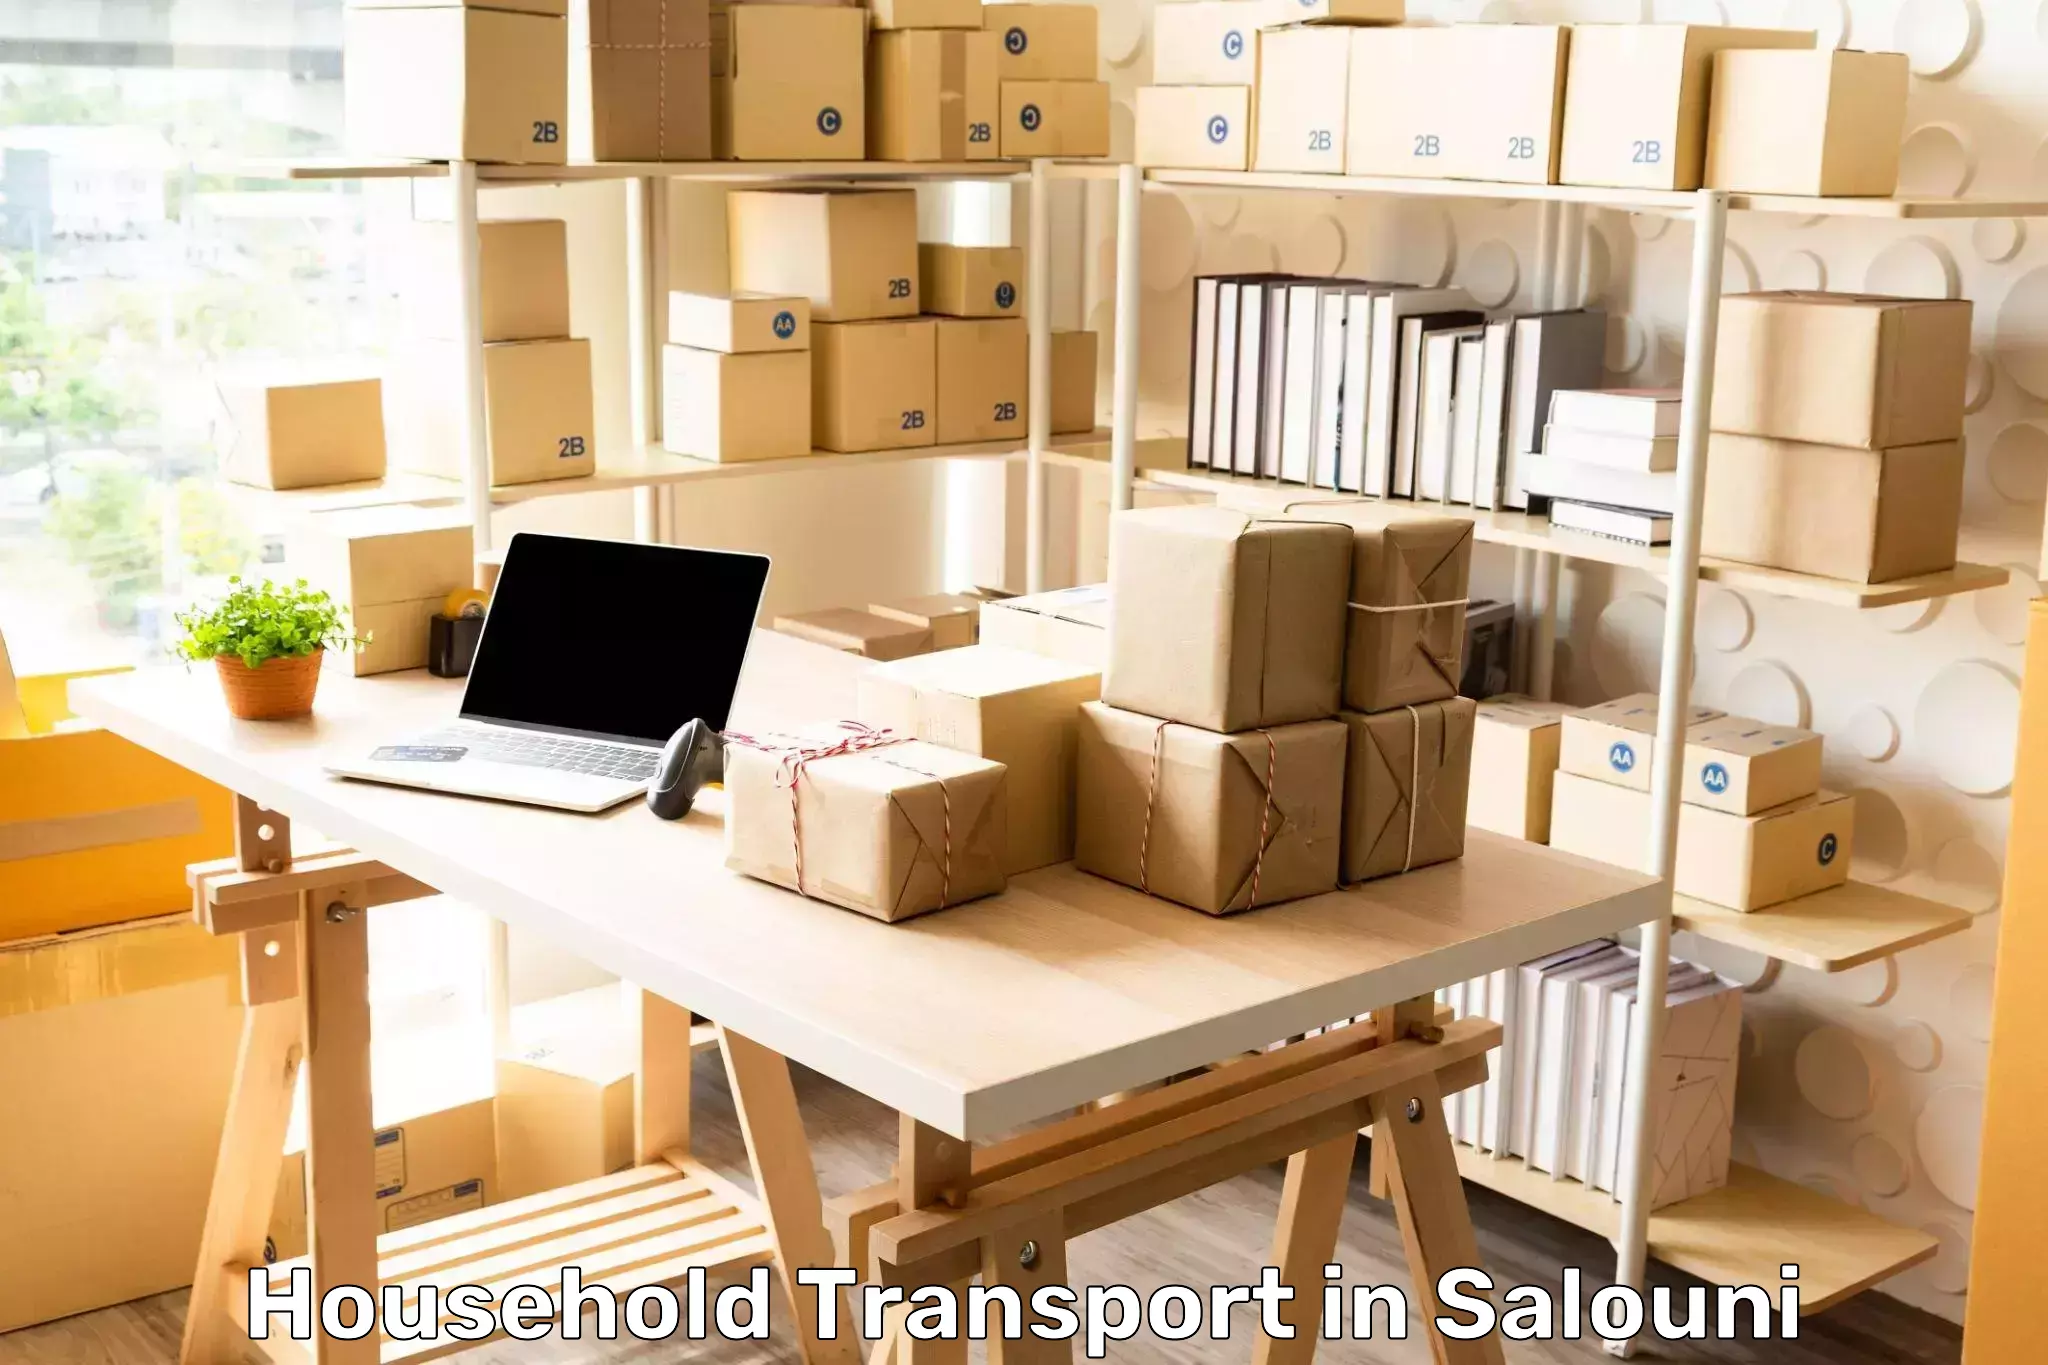 Professional packing services in Salouni